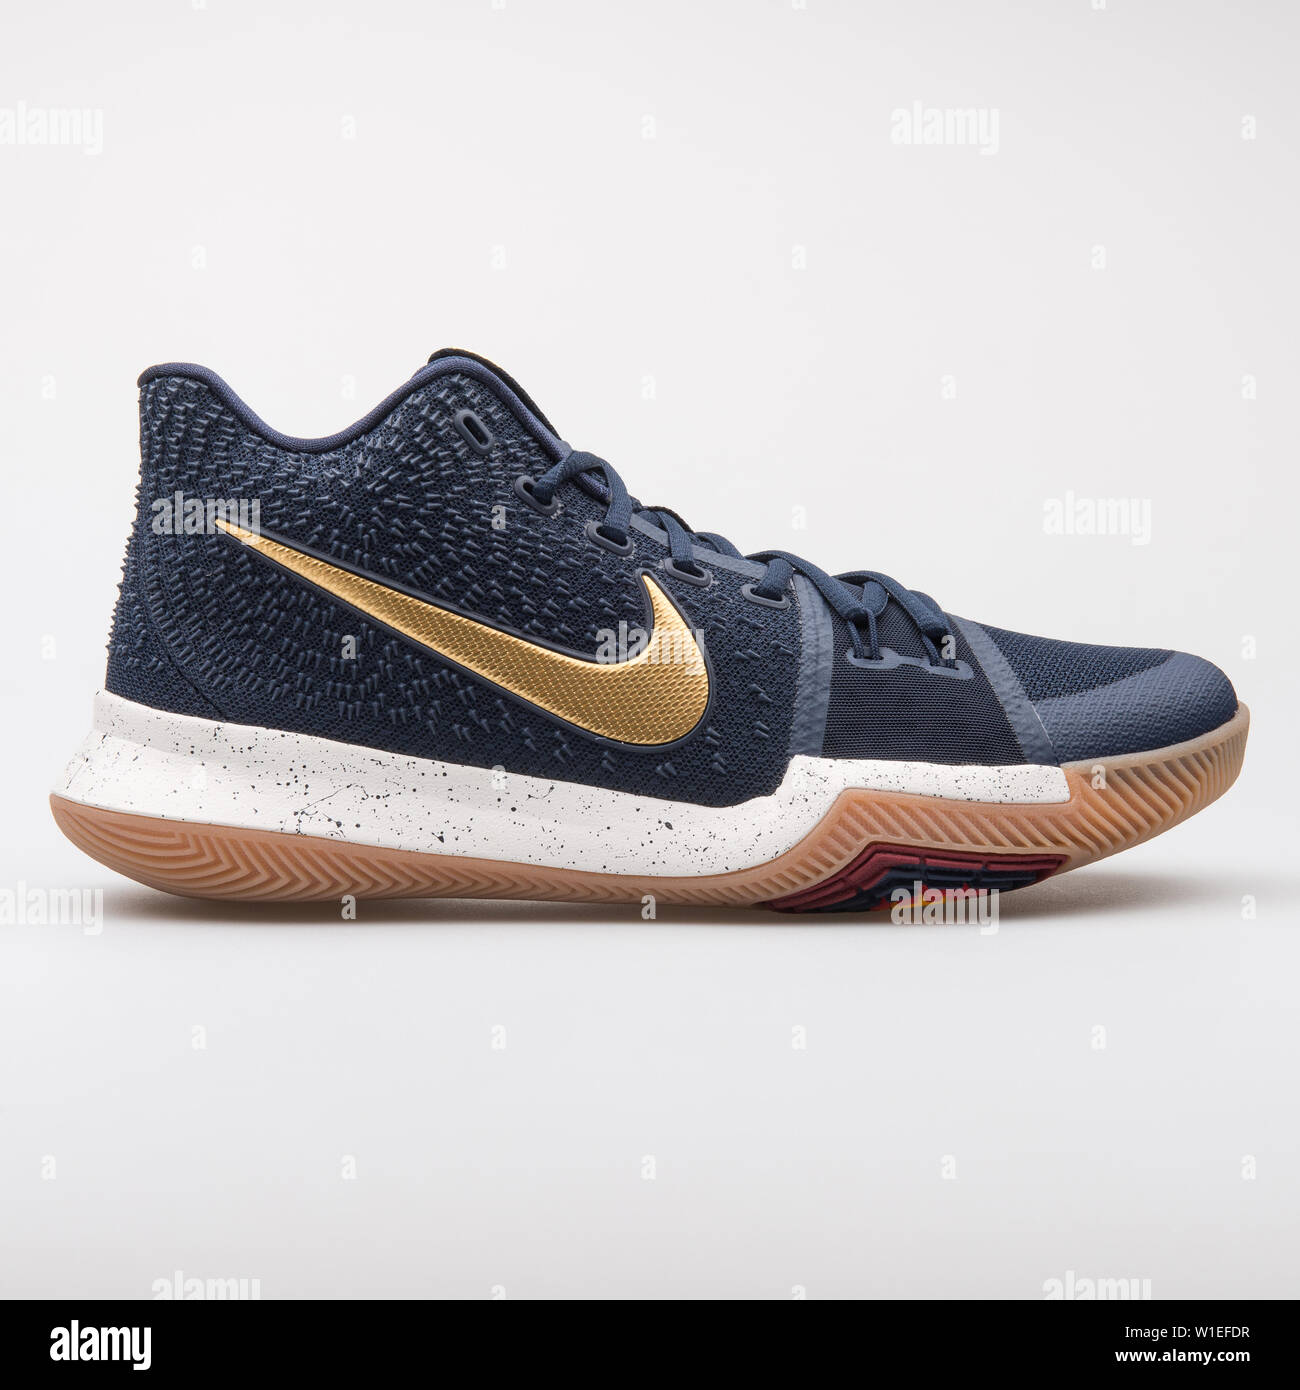 VIENNA, AUSTRIA - AUGUST 7, 2017: Nike Kyrie 3 blue and gold sneaker on  white background Stock Photo - Alamy